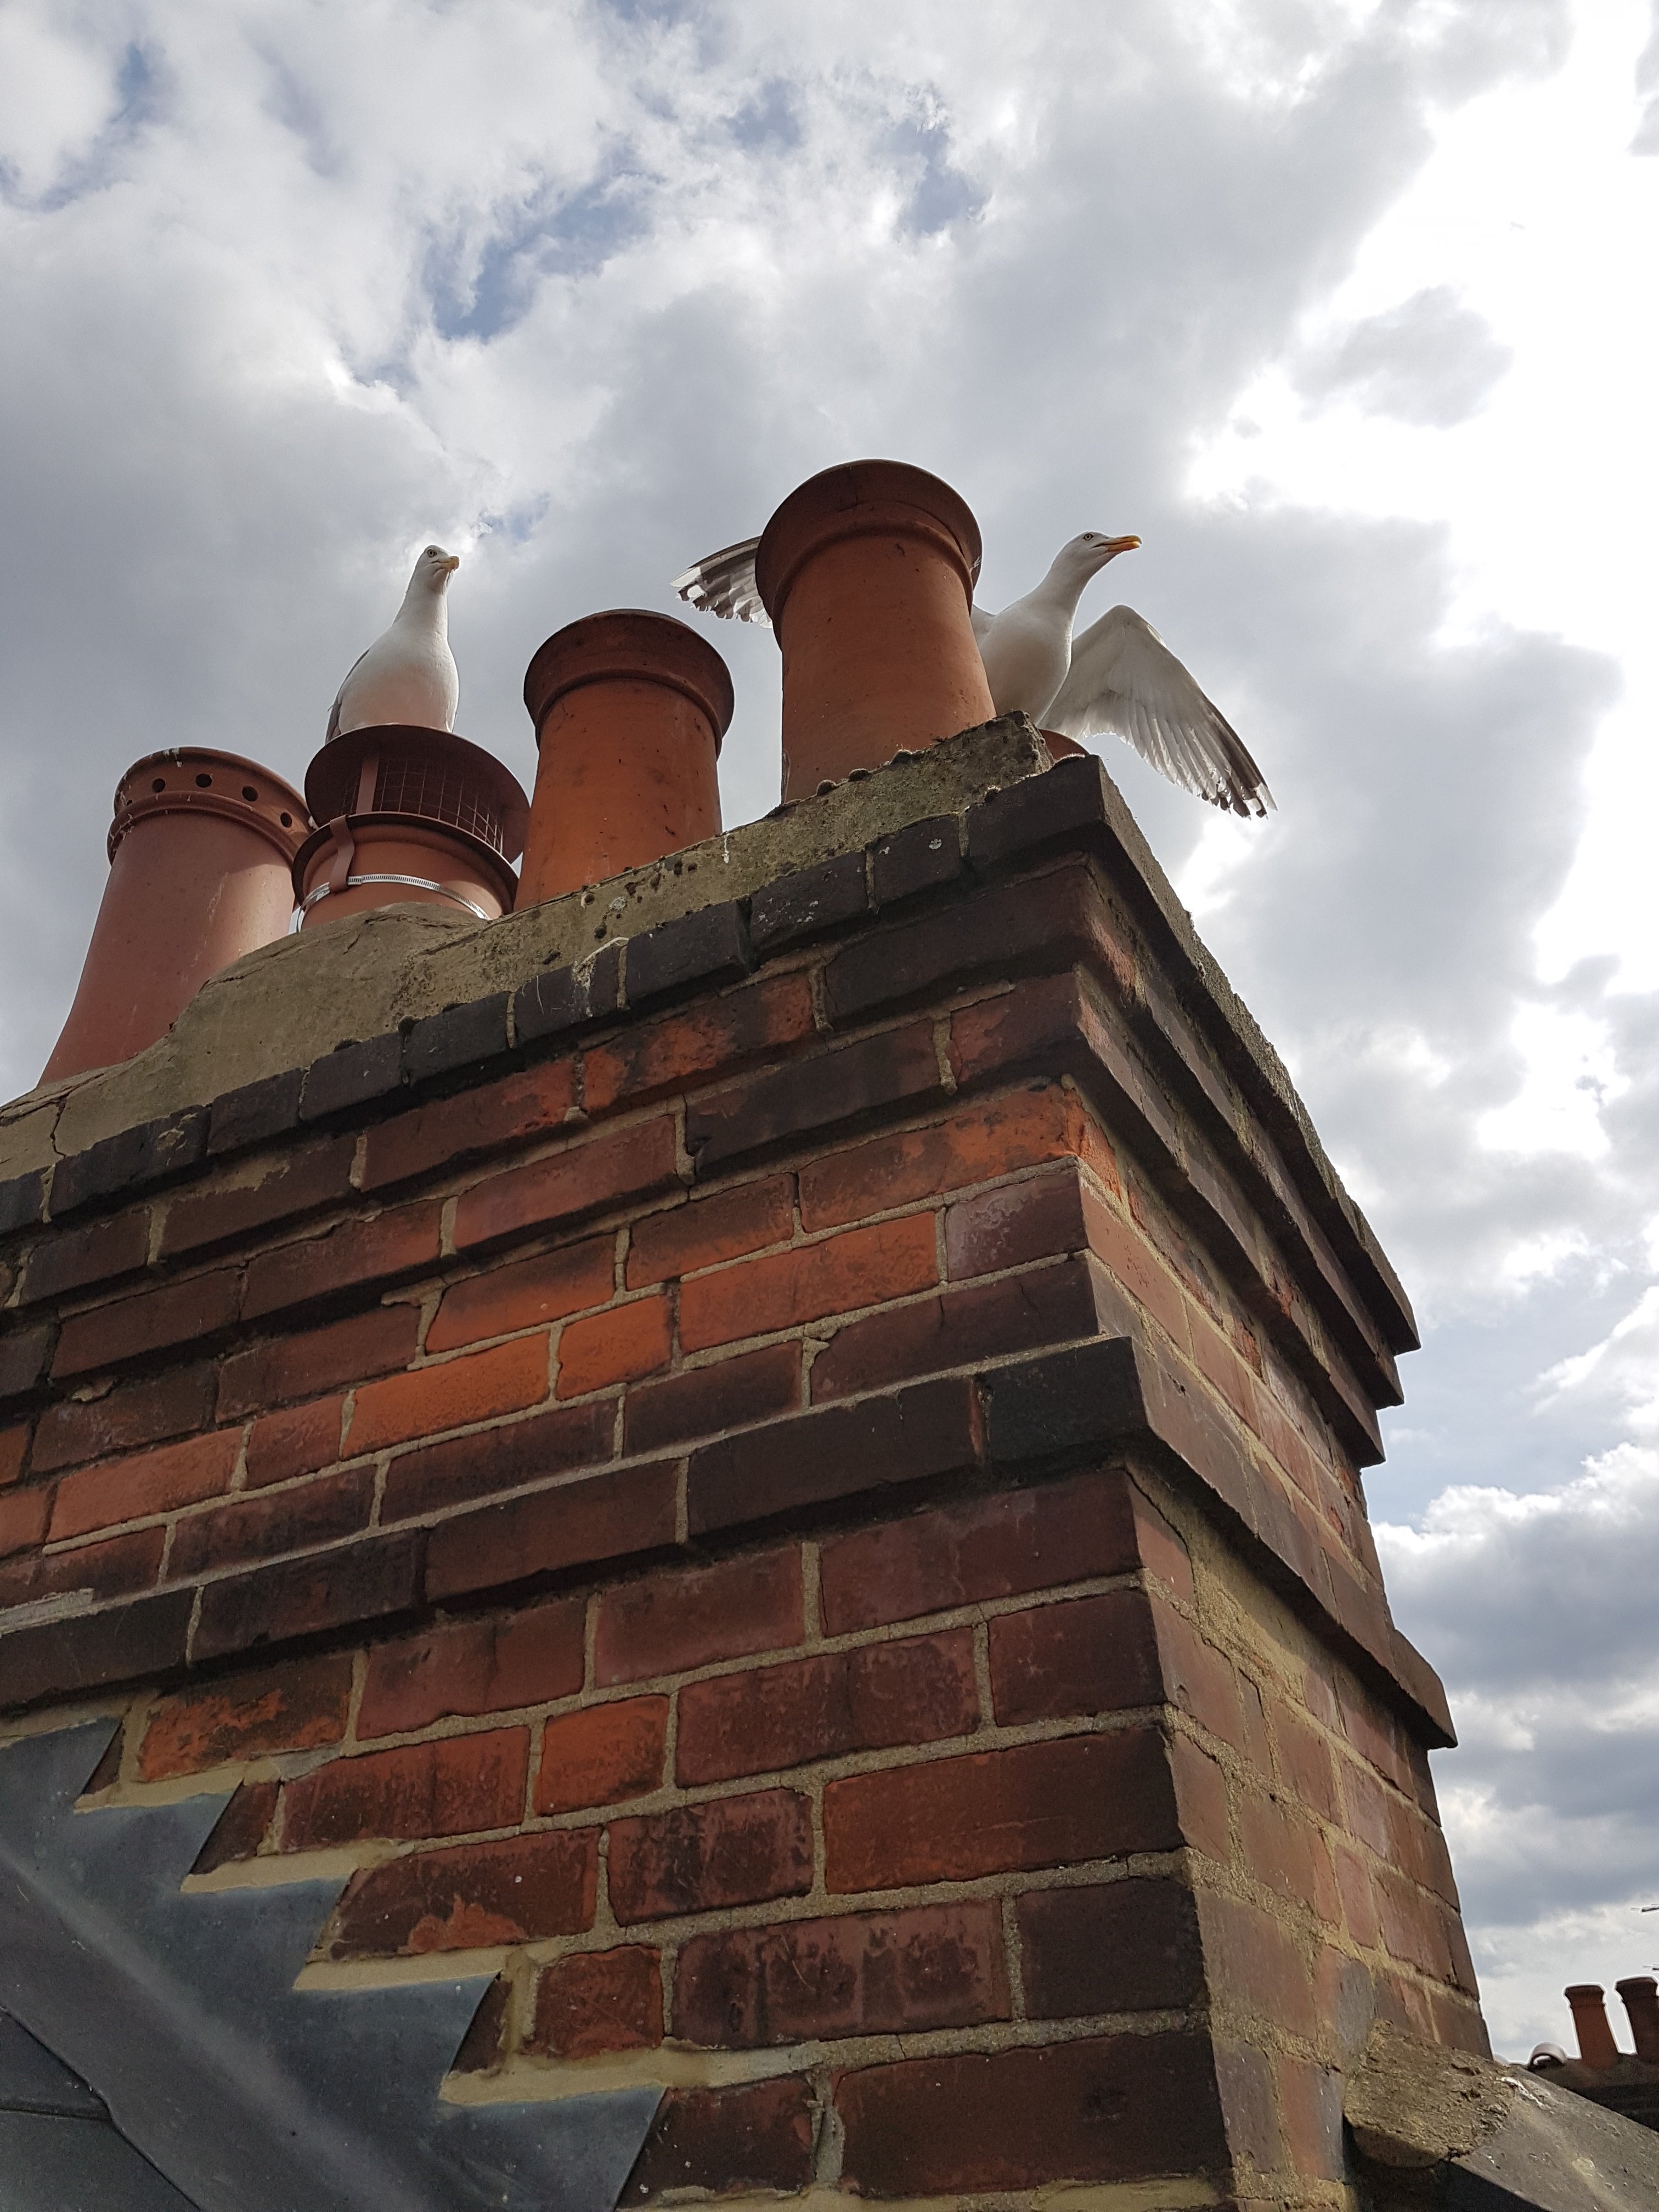 A hightop birdguard preventing seagulls entering the chimney system installed by hodgsons chimney sweeps devon